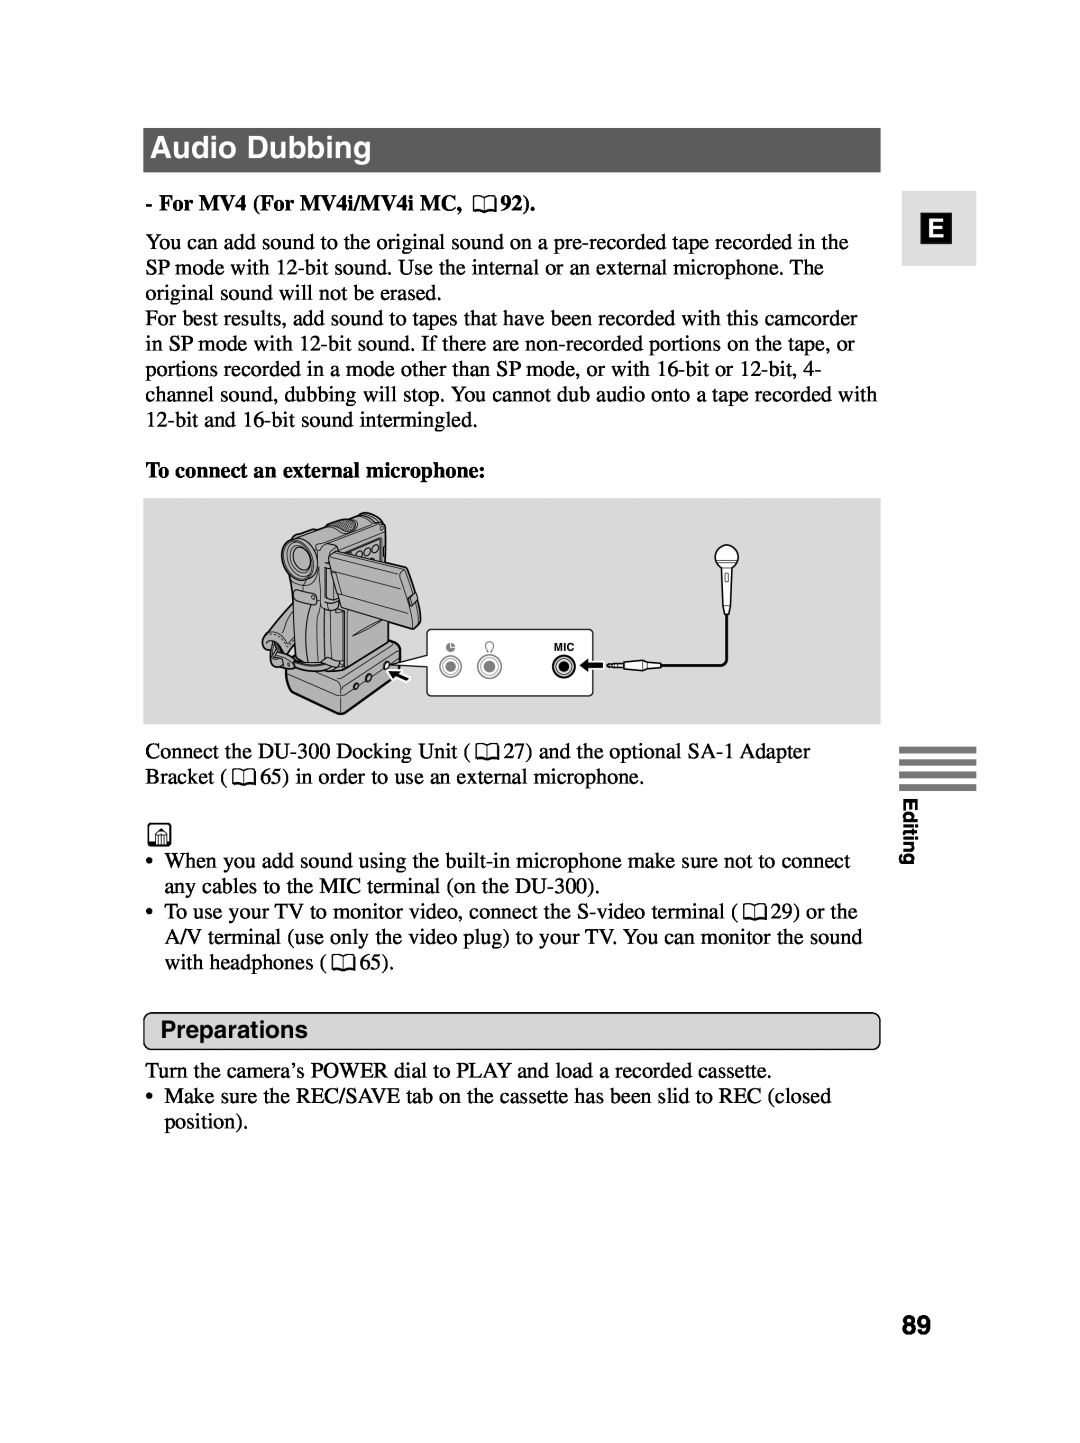 Canon instruction manual Audio Dubbing, For MV4 For MV4i/MV4i MC, To connect an external microphone 